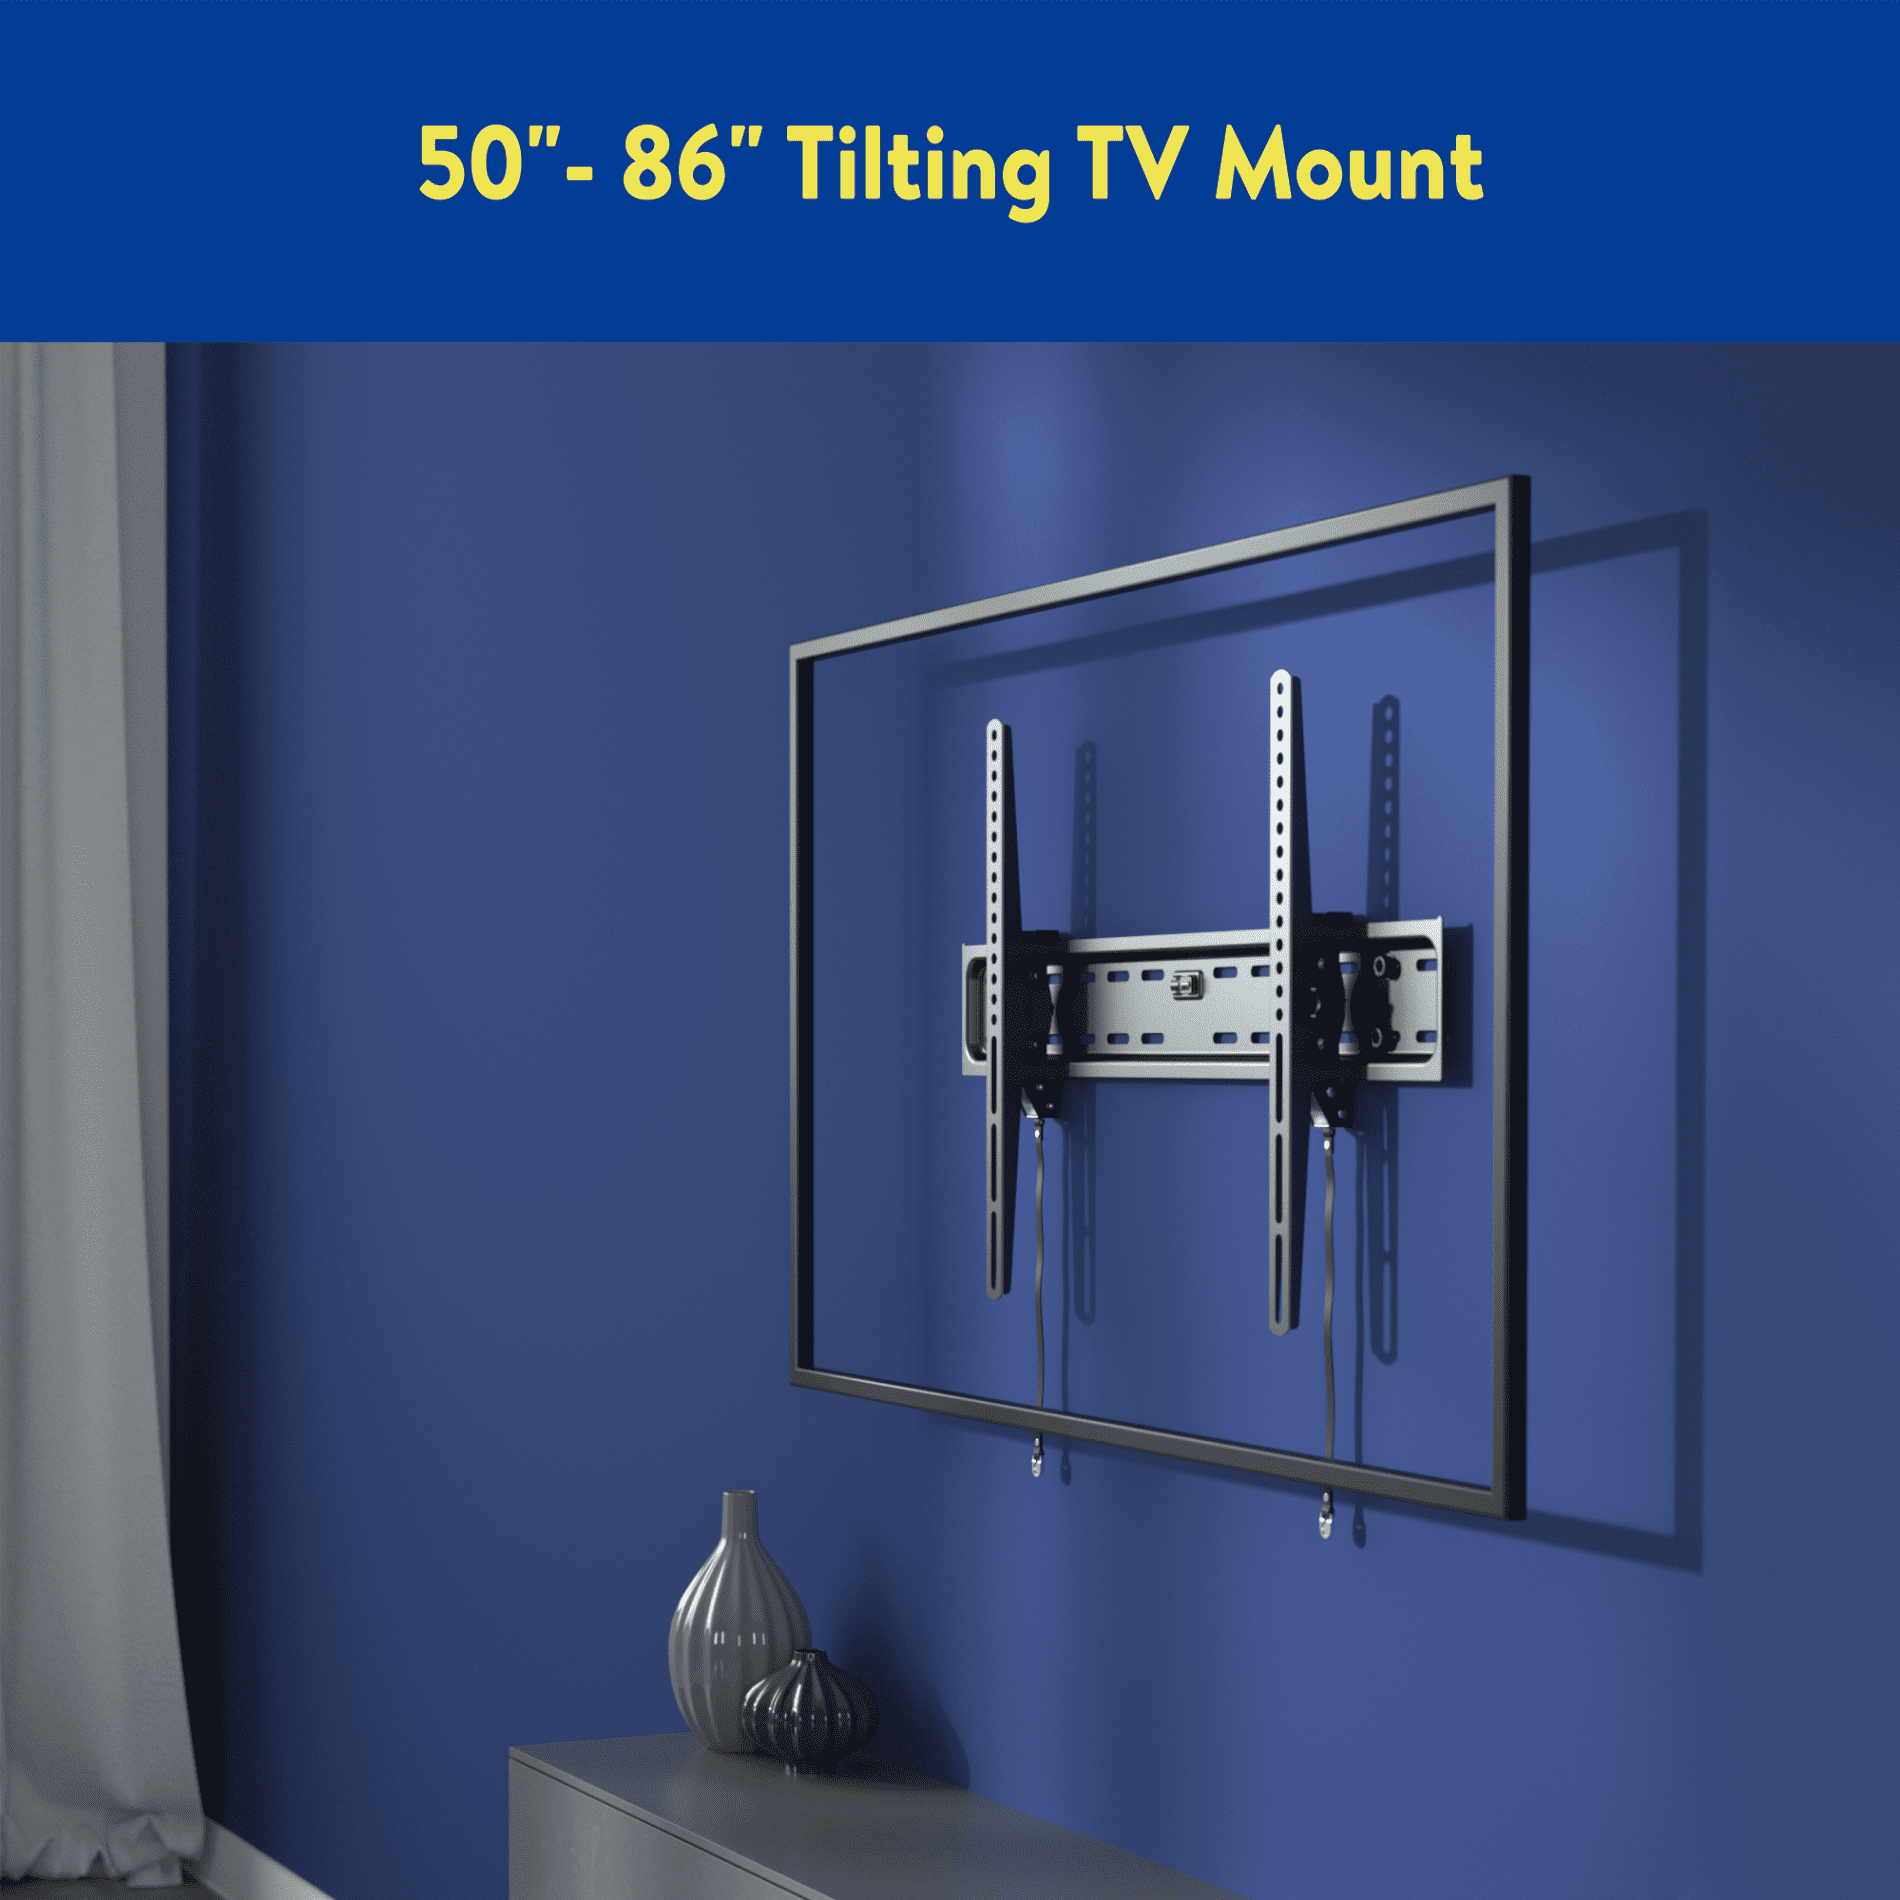 Tilting TV Wall Mount for to 86" up to 12° Tilting - Walmart.com